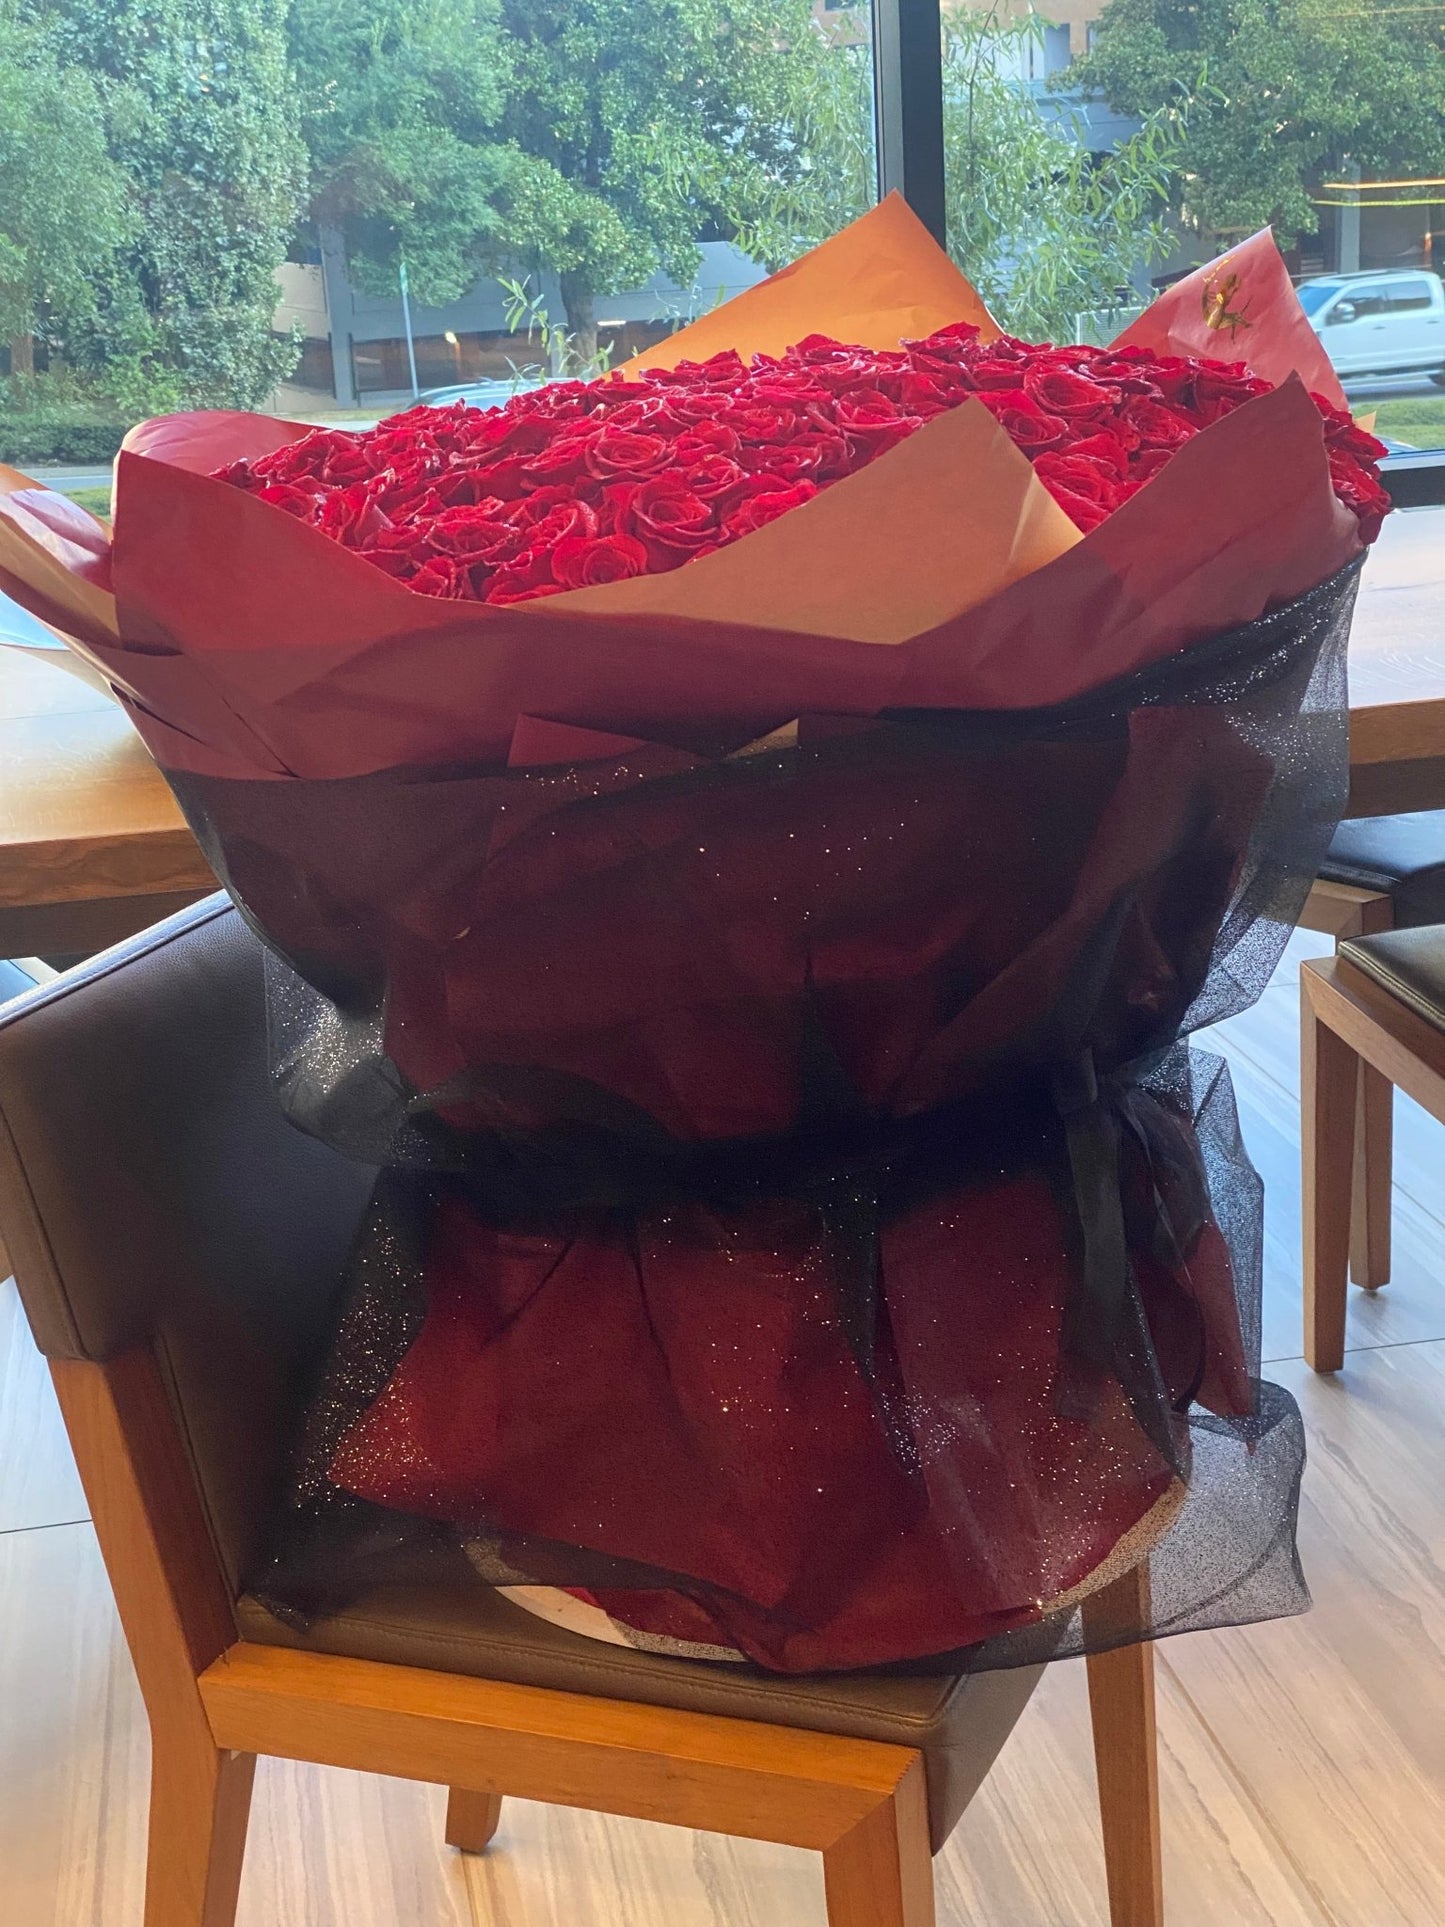 100 ROSES WRAPPED